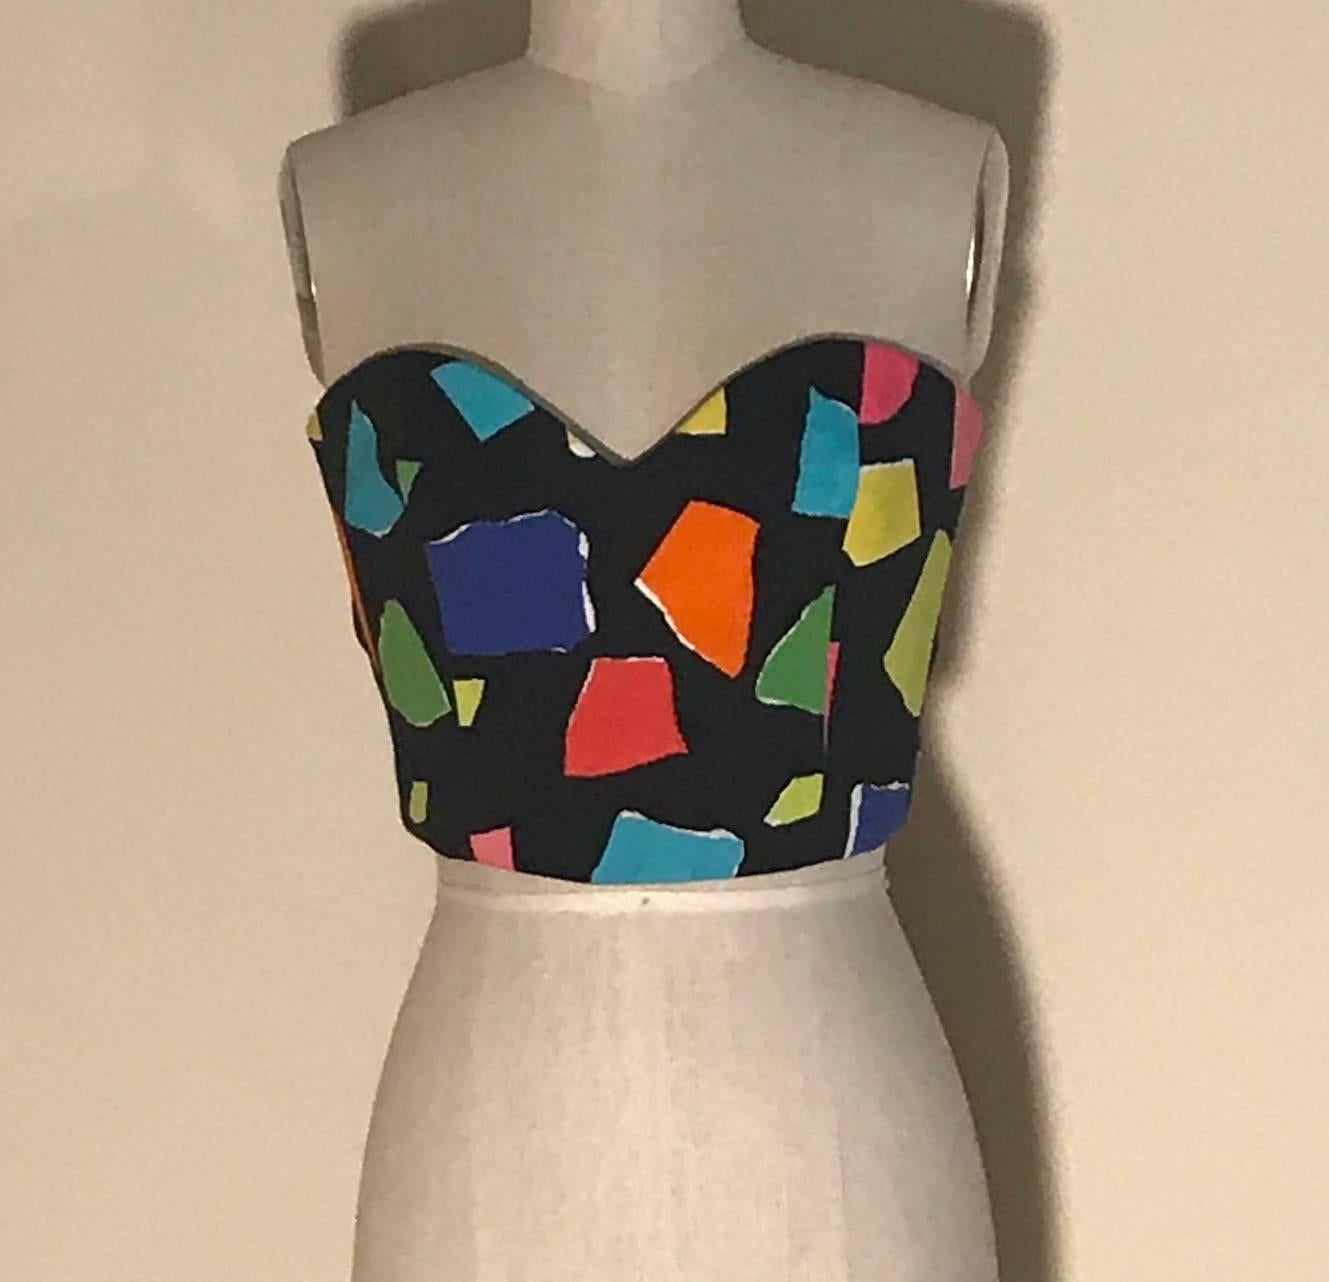 Moschino Couture (designed by by Jeremy Scott) black and multi color abstract print bustier style top with sweetheart neckline and tie back. Boned at front. Fastens at back with cloth covered elastic on hooks, which is then covered with the tie.